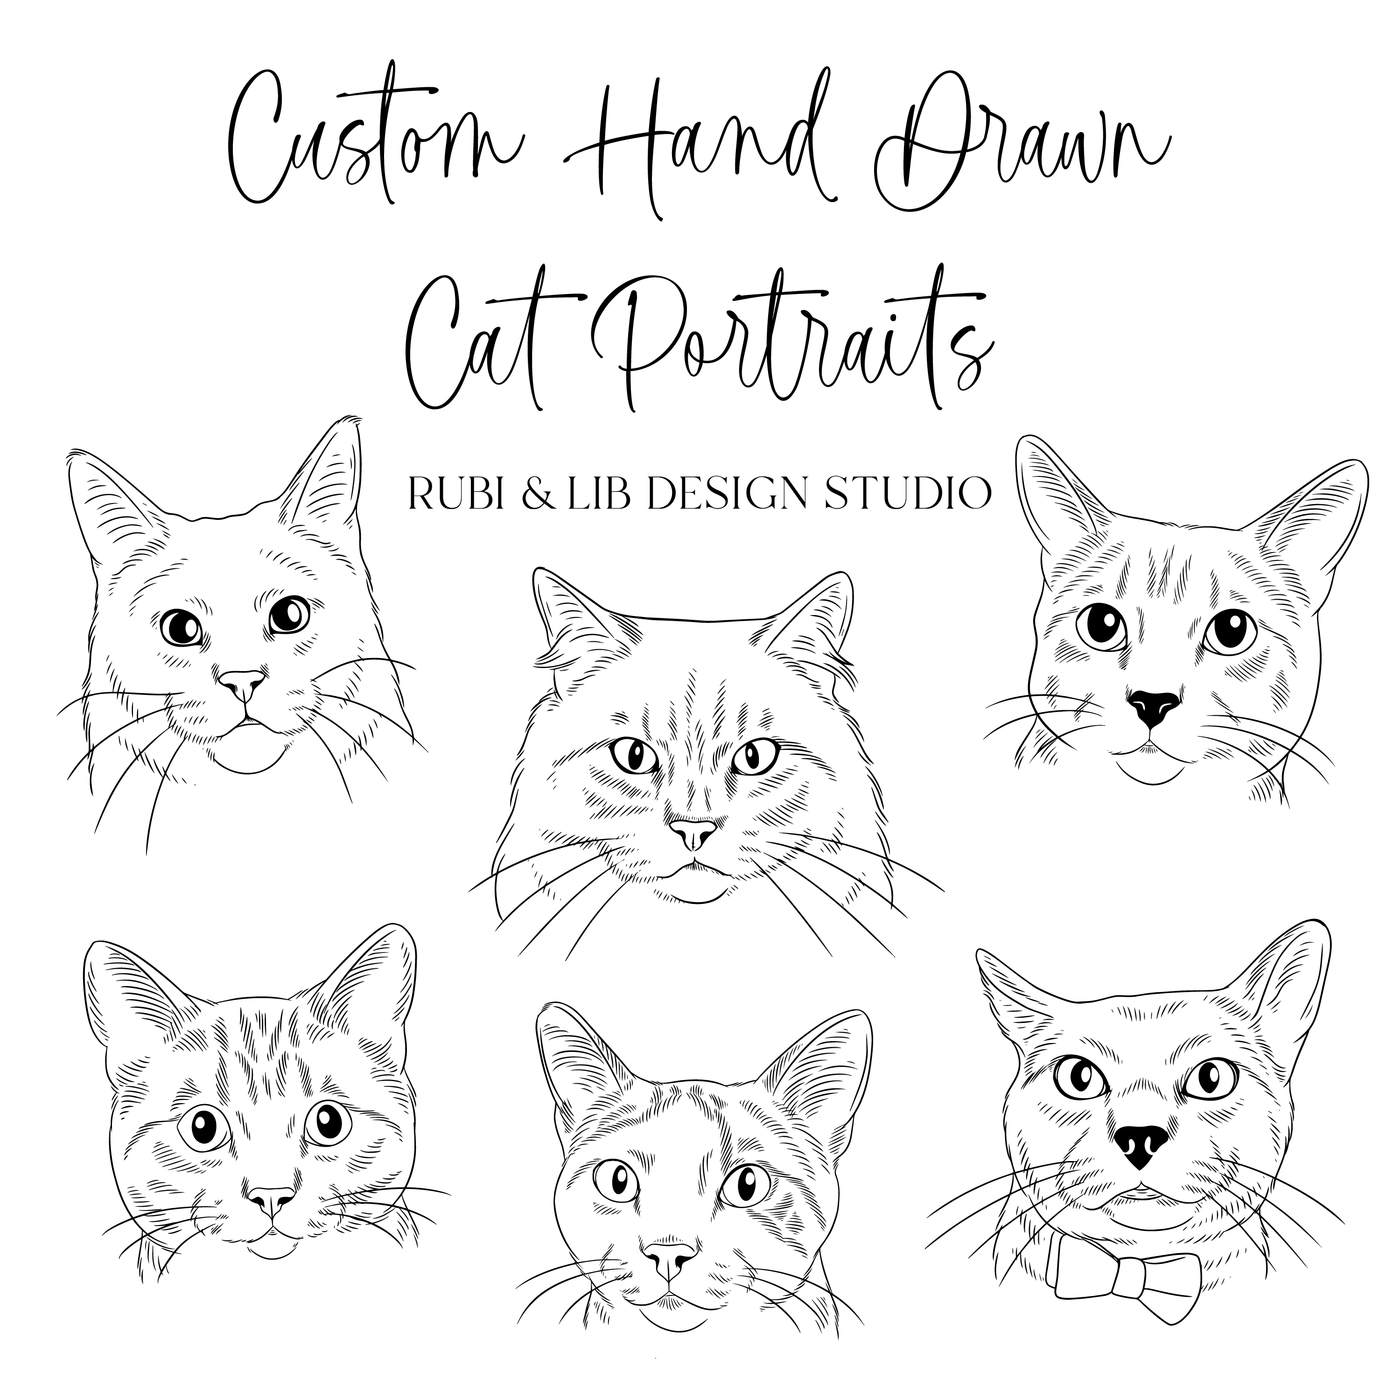 Hand Drawn Cat Portrait - Extended License